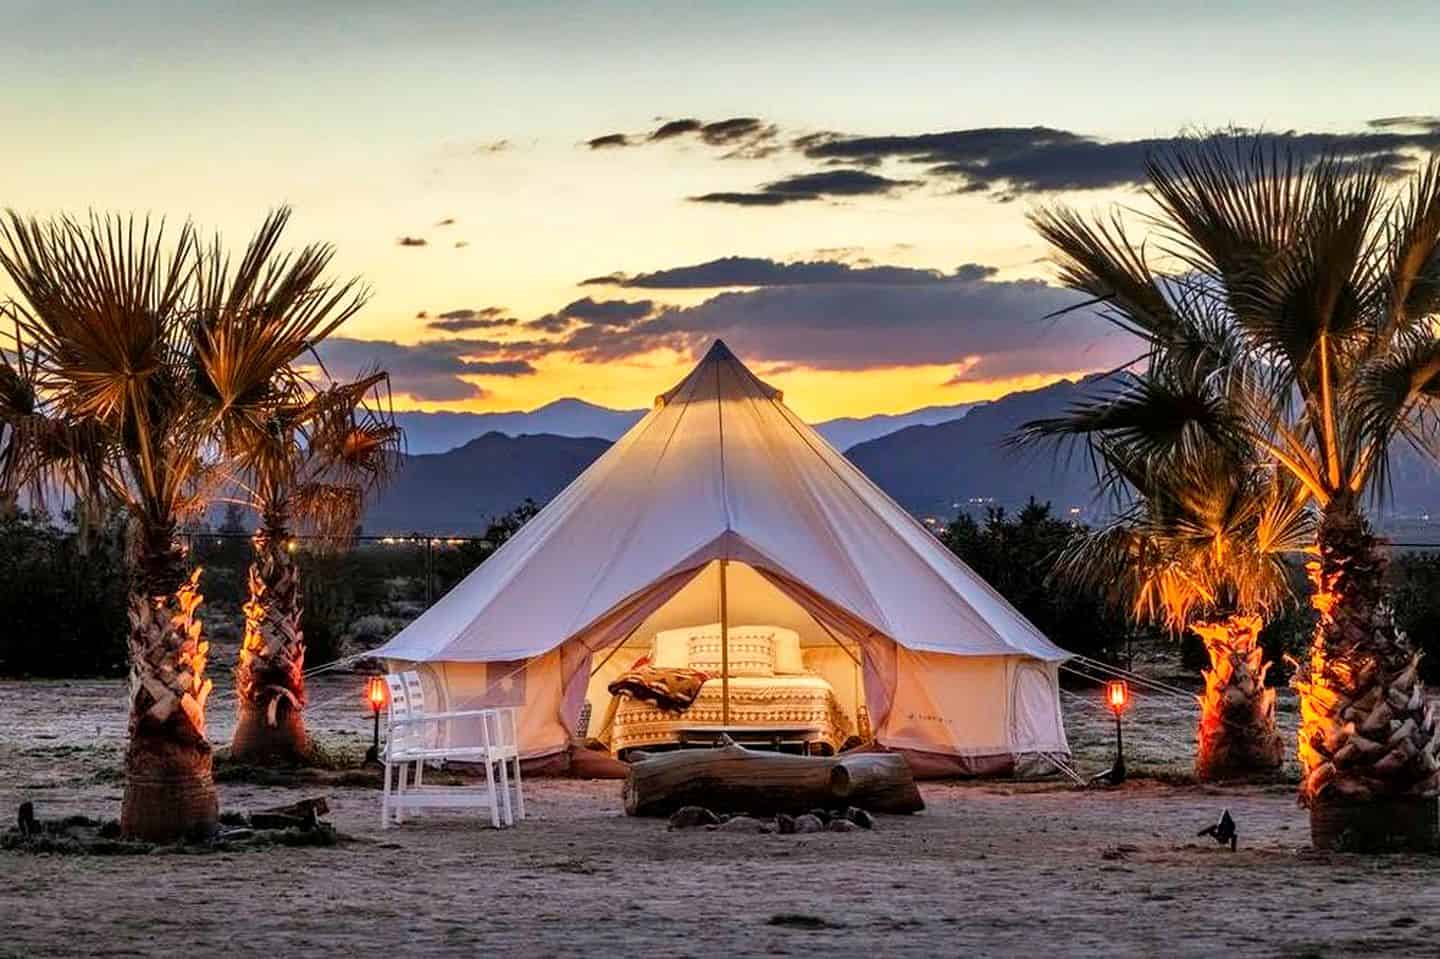 Glamping. Joshua Tree accommodation is perfect for glamping in California. Luxury camping is the ideal way to reconnect with the outdoors.